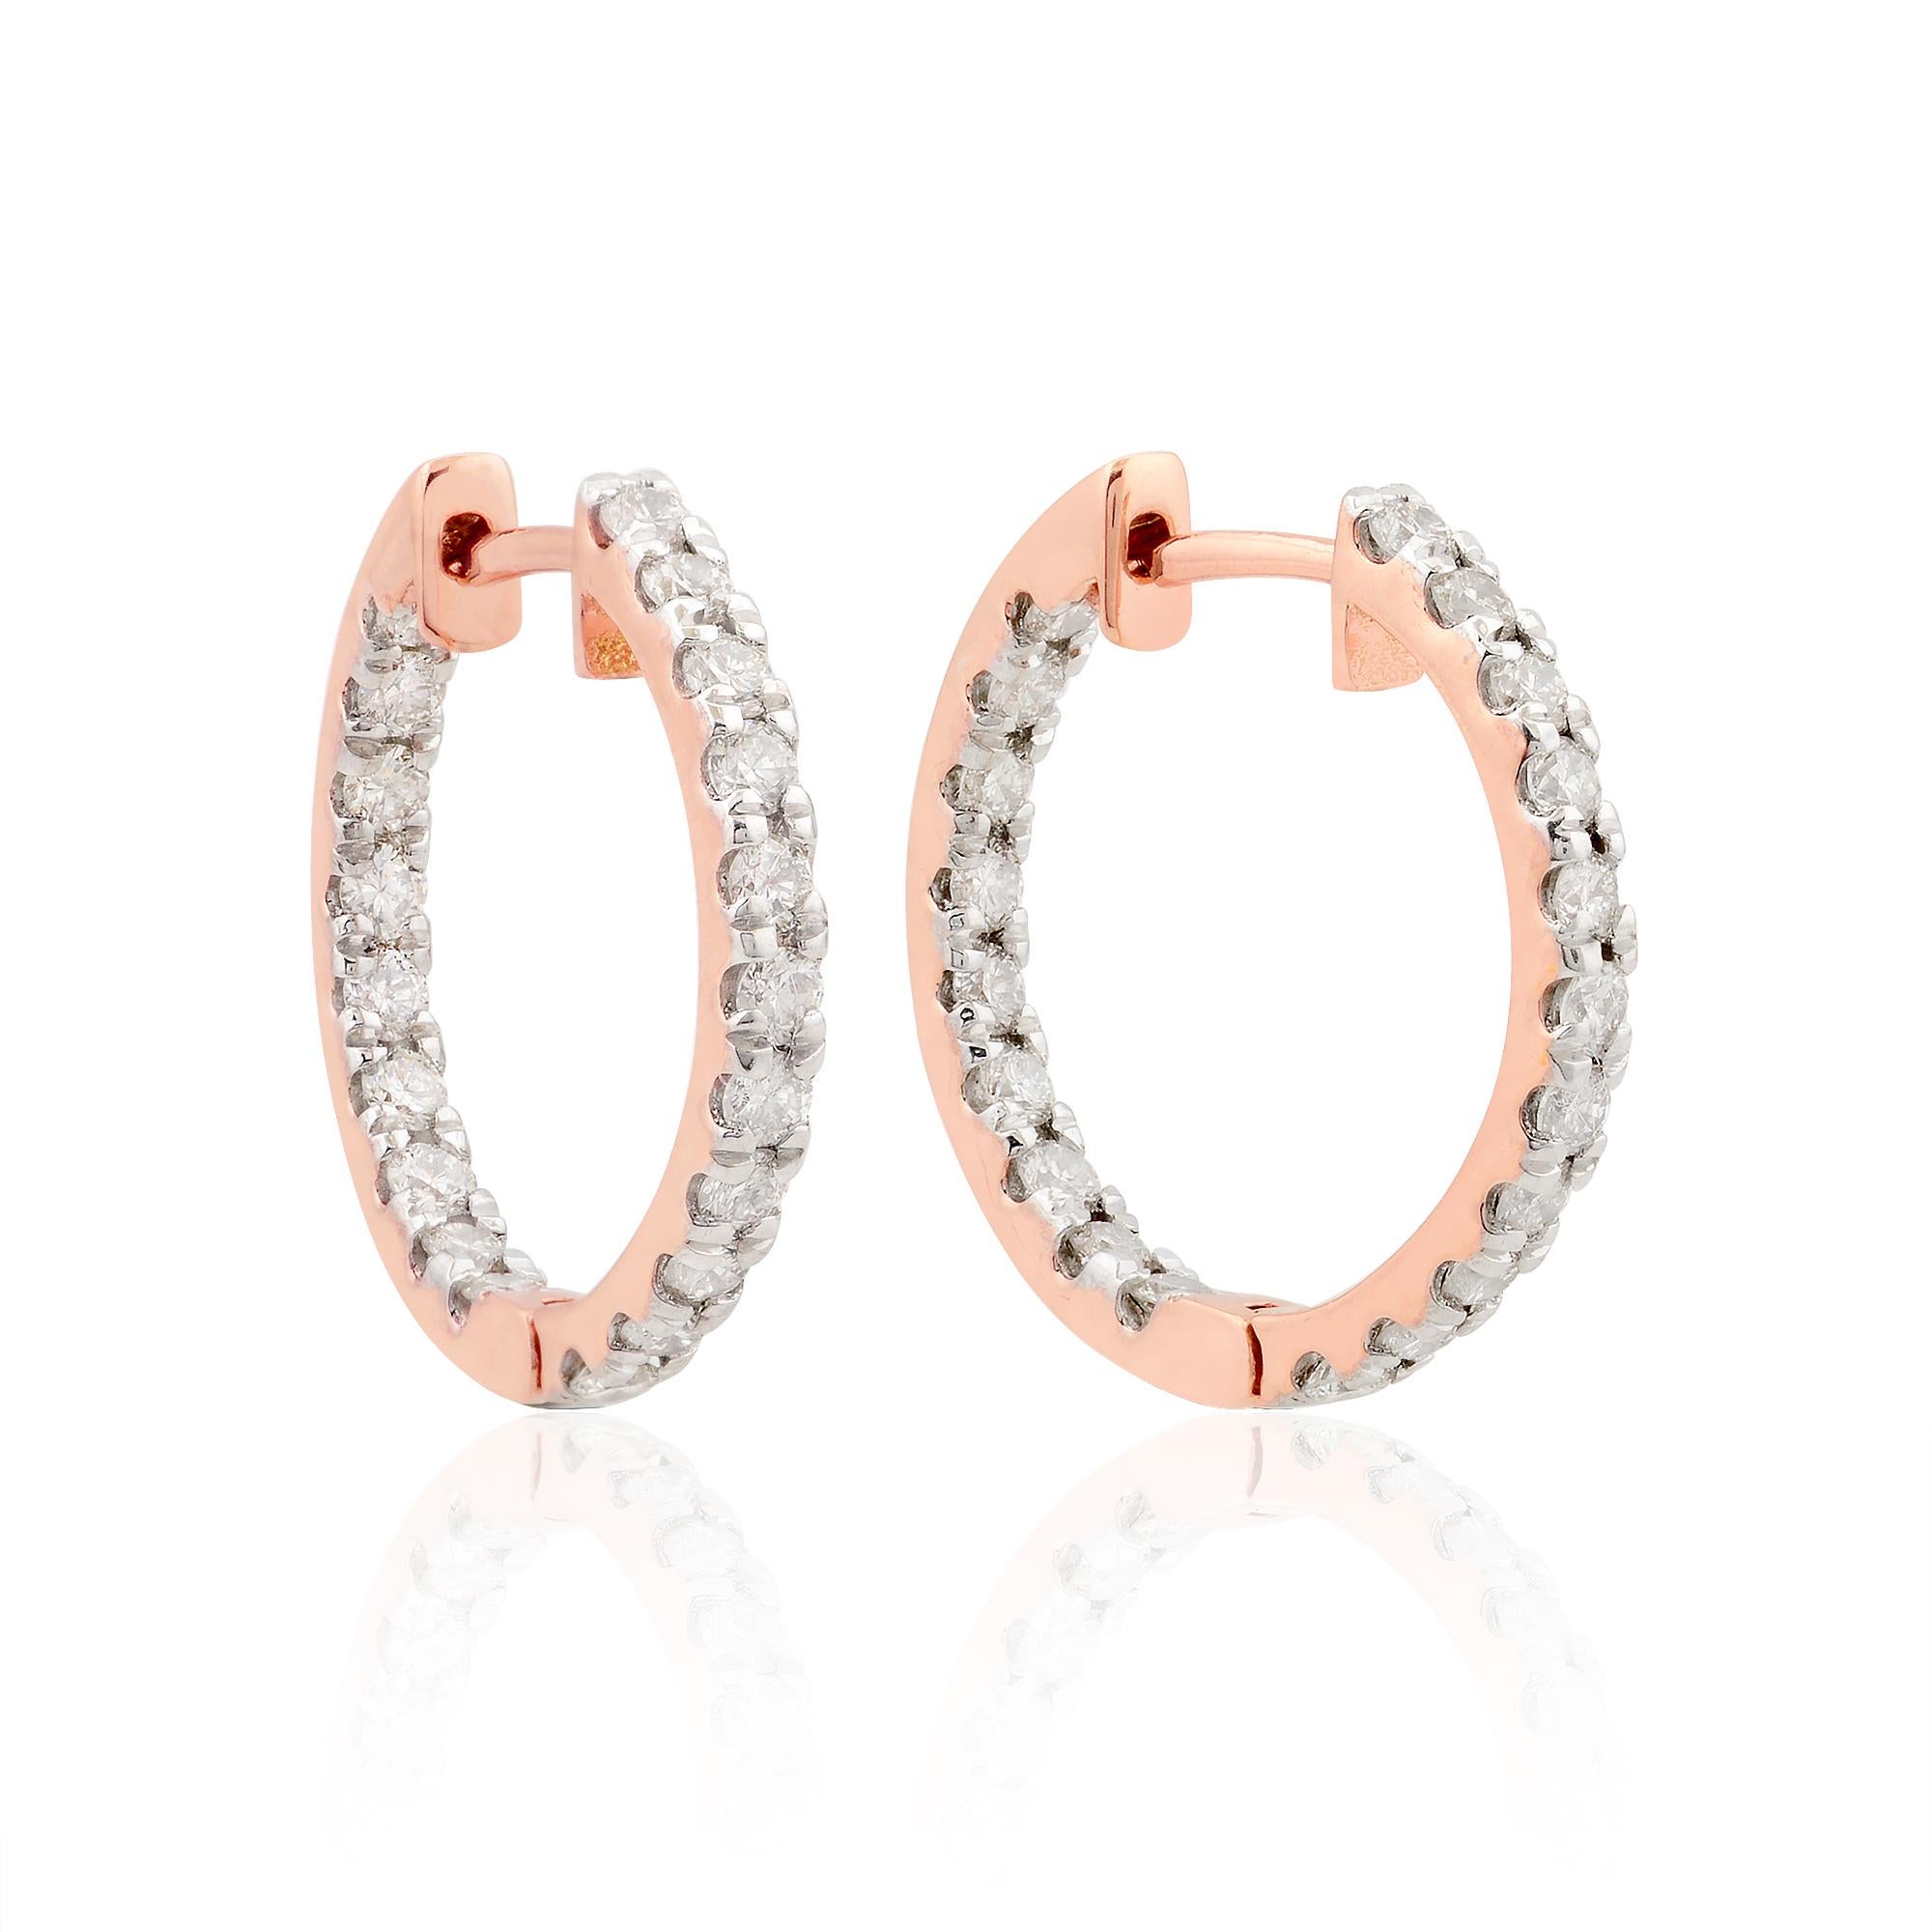 Item Code :- STE-1099N
Gross Weight :- 3.09 gm
10k Solid Rose Gold Weight :- 2.88 gm
Diamond Weight :- 1.07 carat ( SI Clarity & HI Color )
Earrings Size :- 18 mm outer diameter 

✦ Sizing
.....................
We can adjust most items to fit your